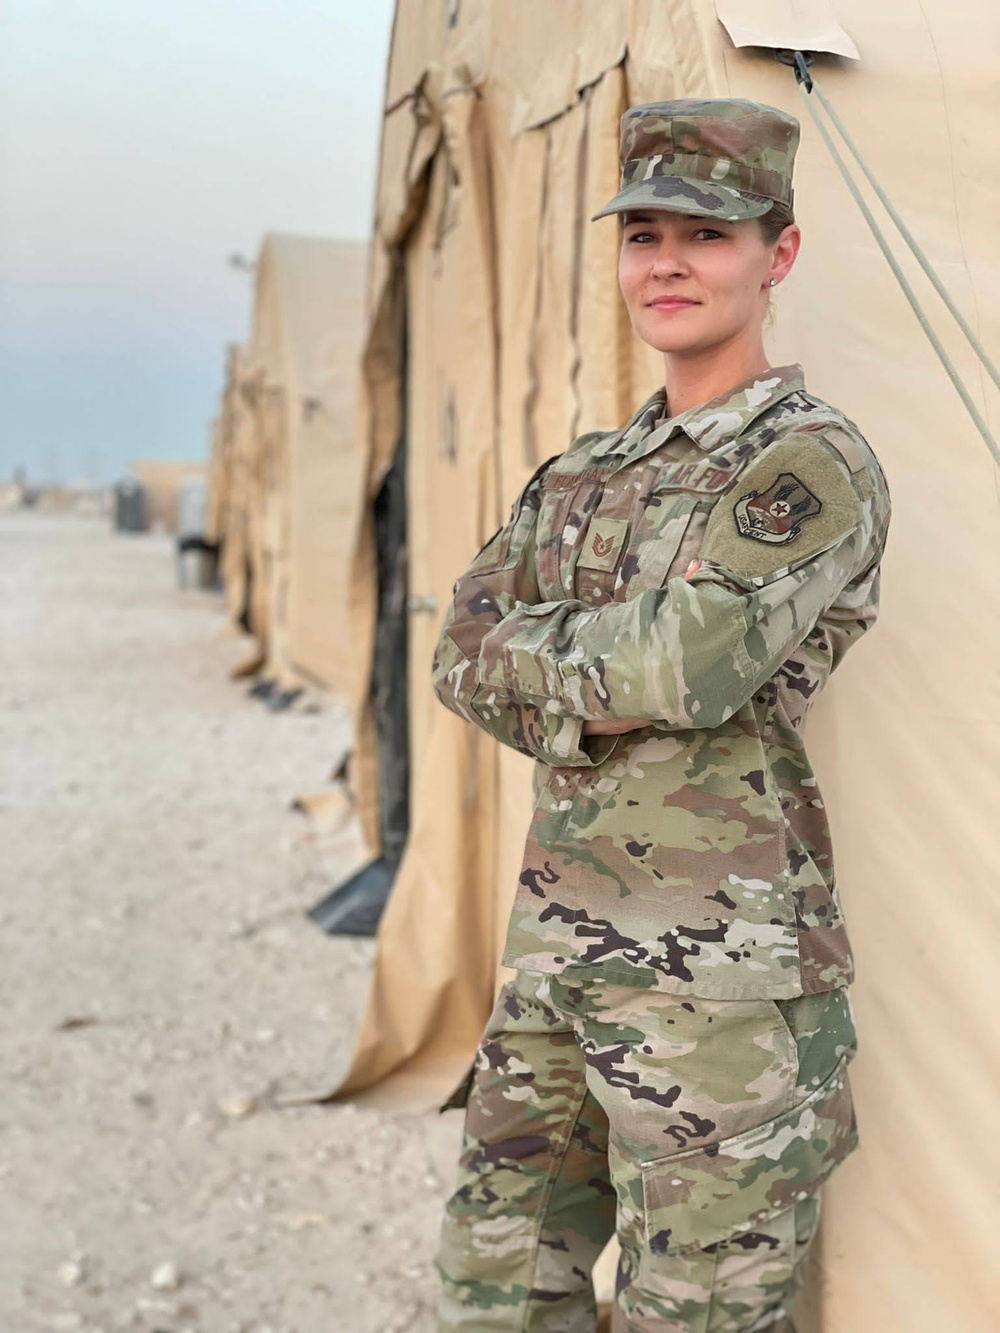 Airman forward deploys to assist with noncombatant evacuation operations